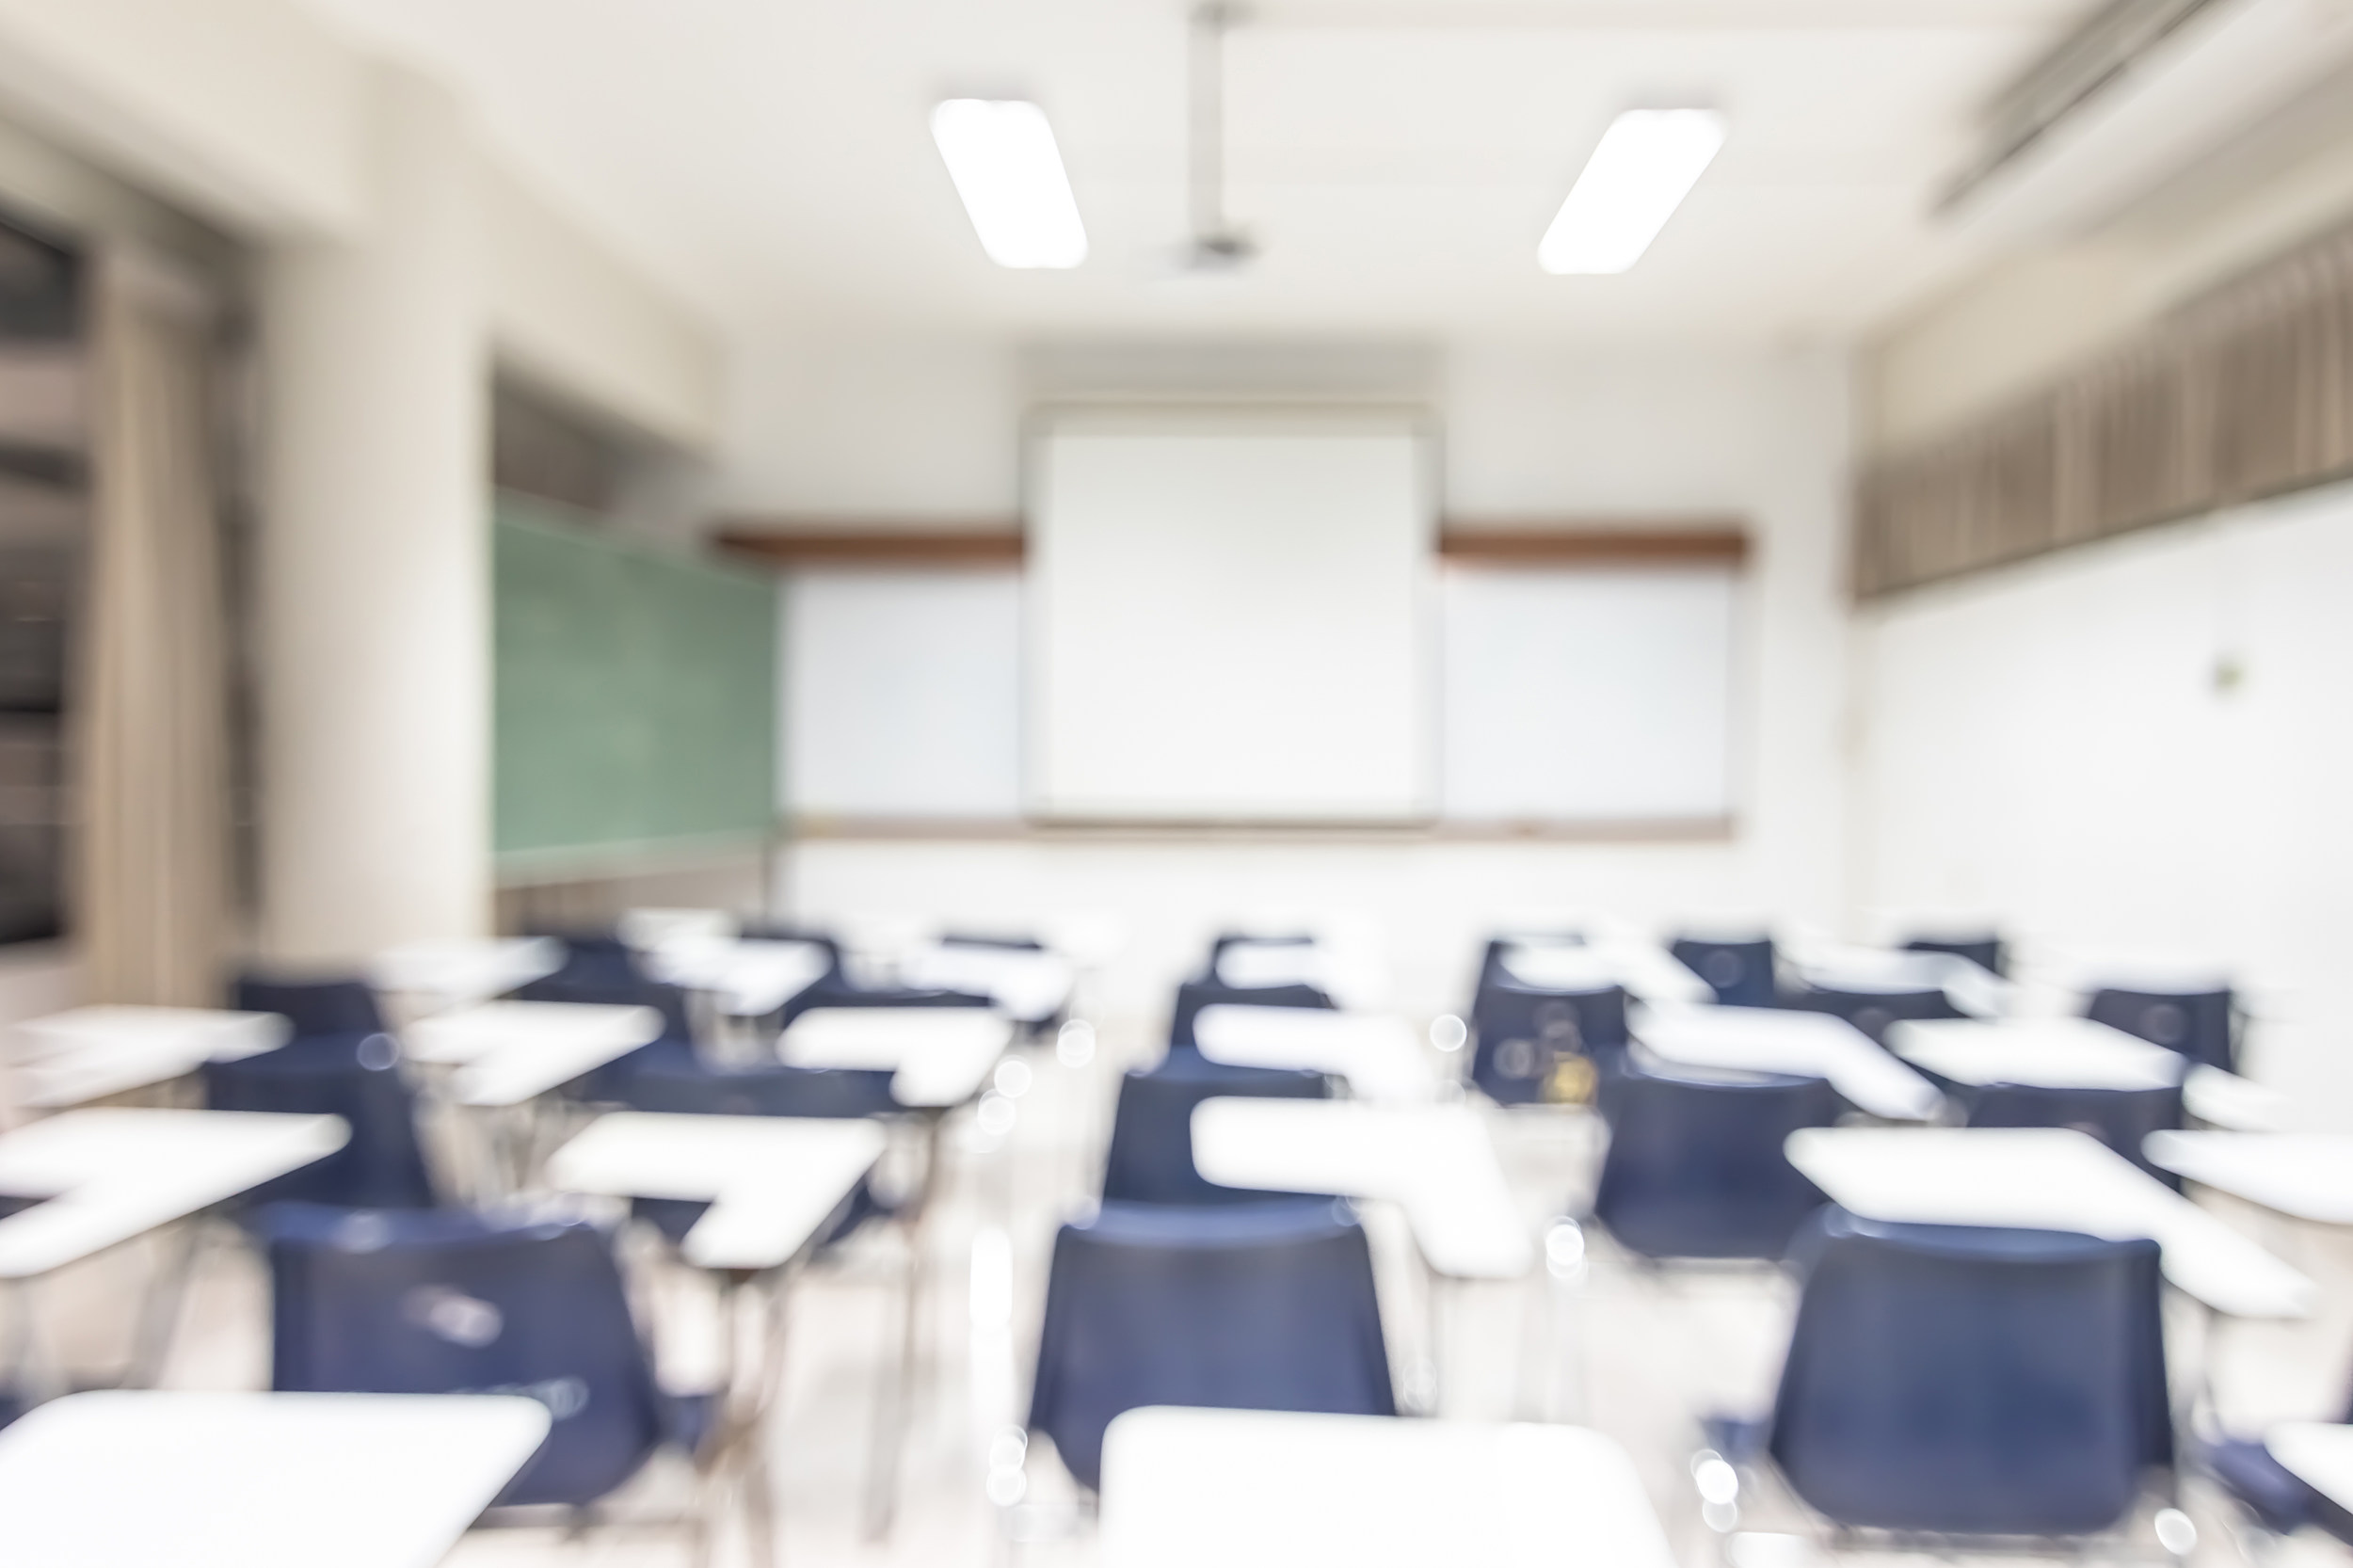 Blur  classroom education background empty school class lecture room interior view with no teacher nor student